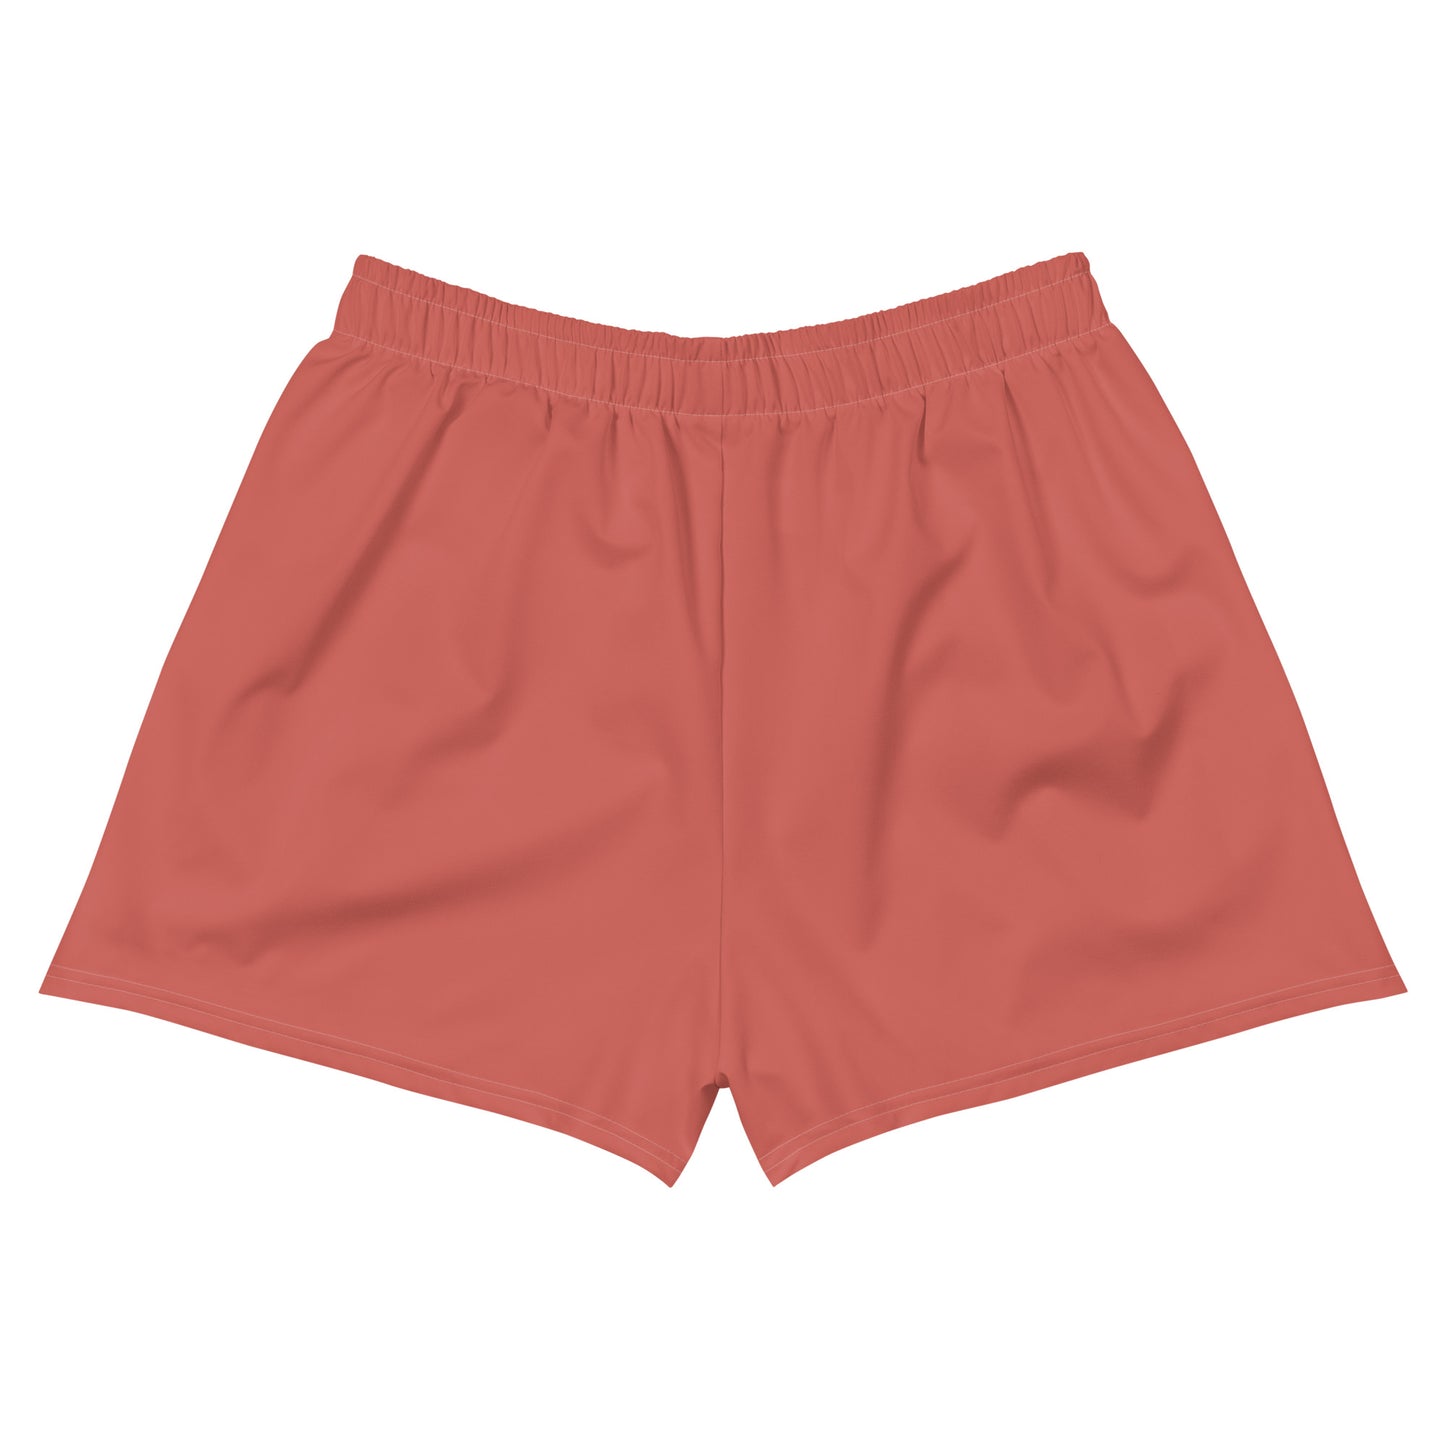 Heart - Inspired By Taylor Swift - Sustainably Made Women’s Shorts